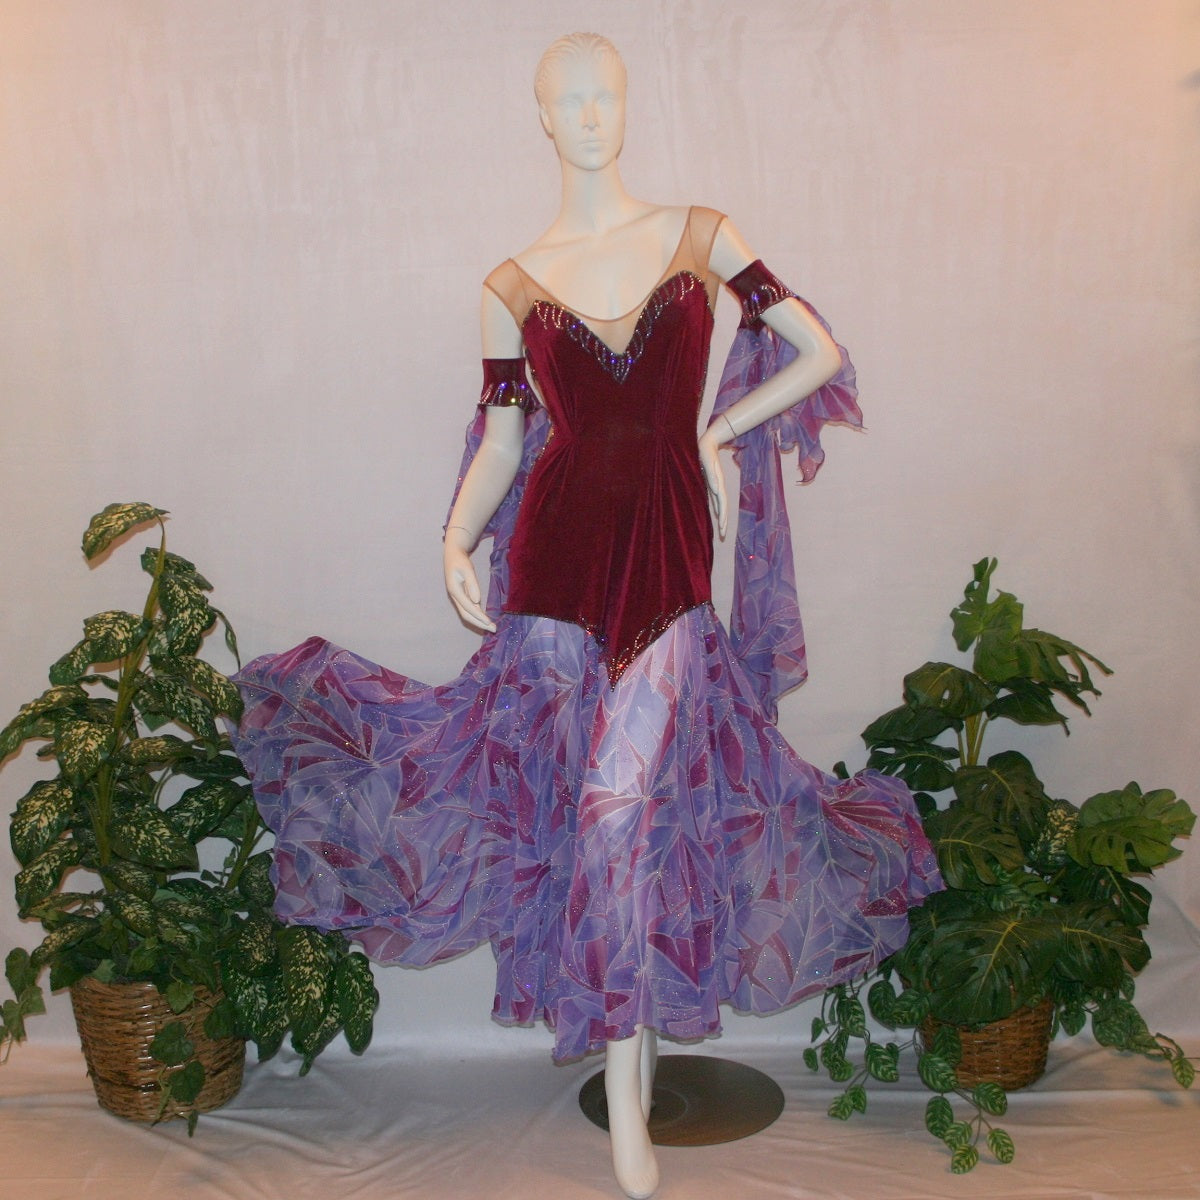 Crystal's Creations Magenta converta ballroom dress created of magenta solid slinky on a nude illusion base with tropical chiffon print skirtings of magenta & orchids, is embellished with tanzanite & orchid rhinestone work.